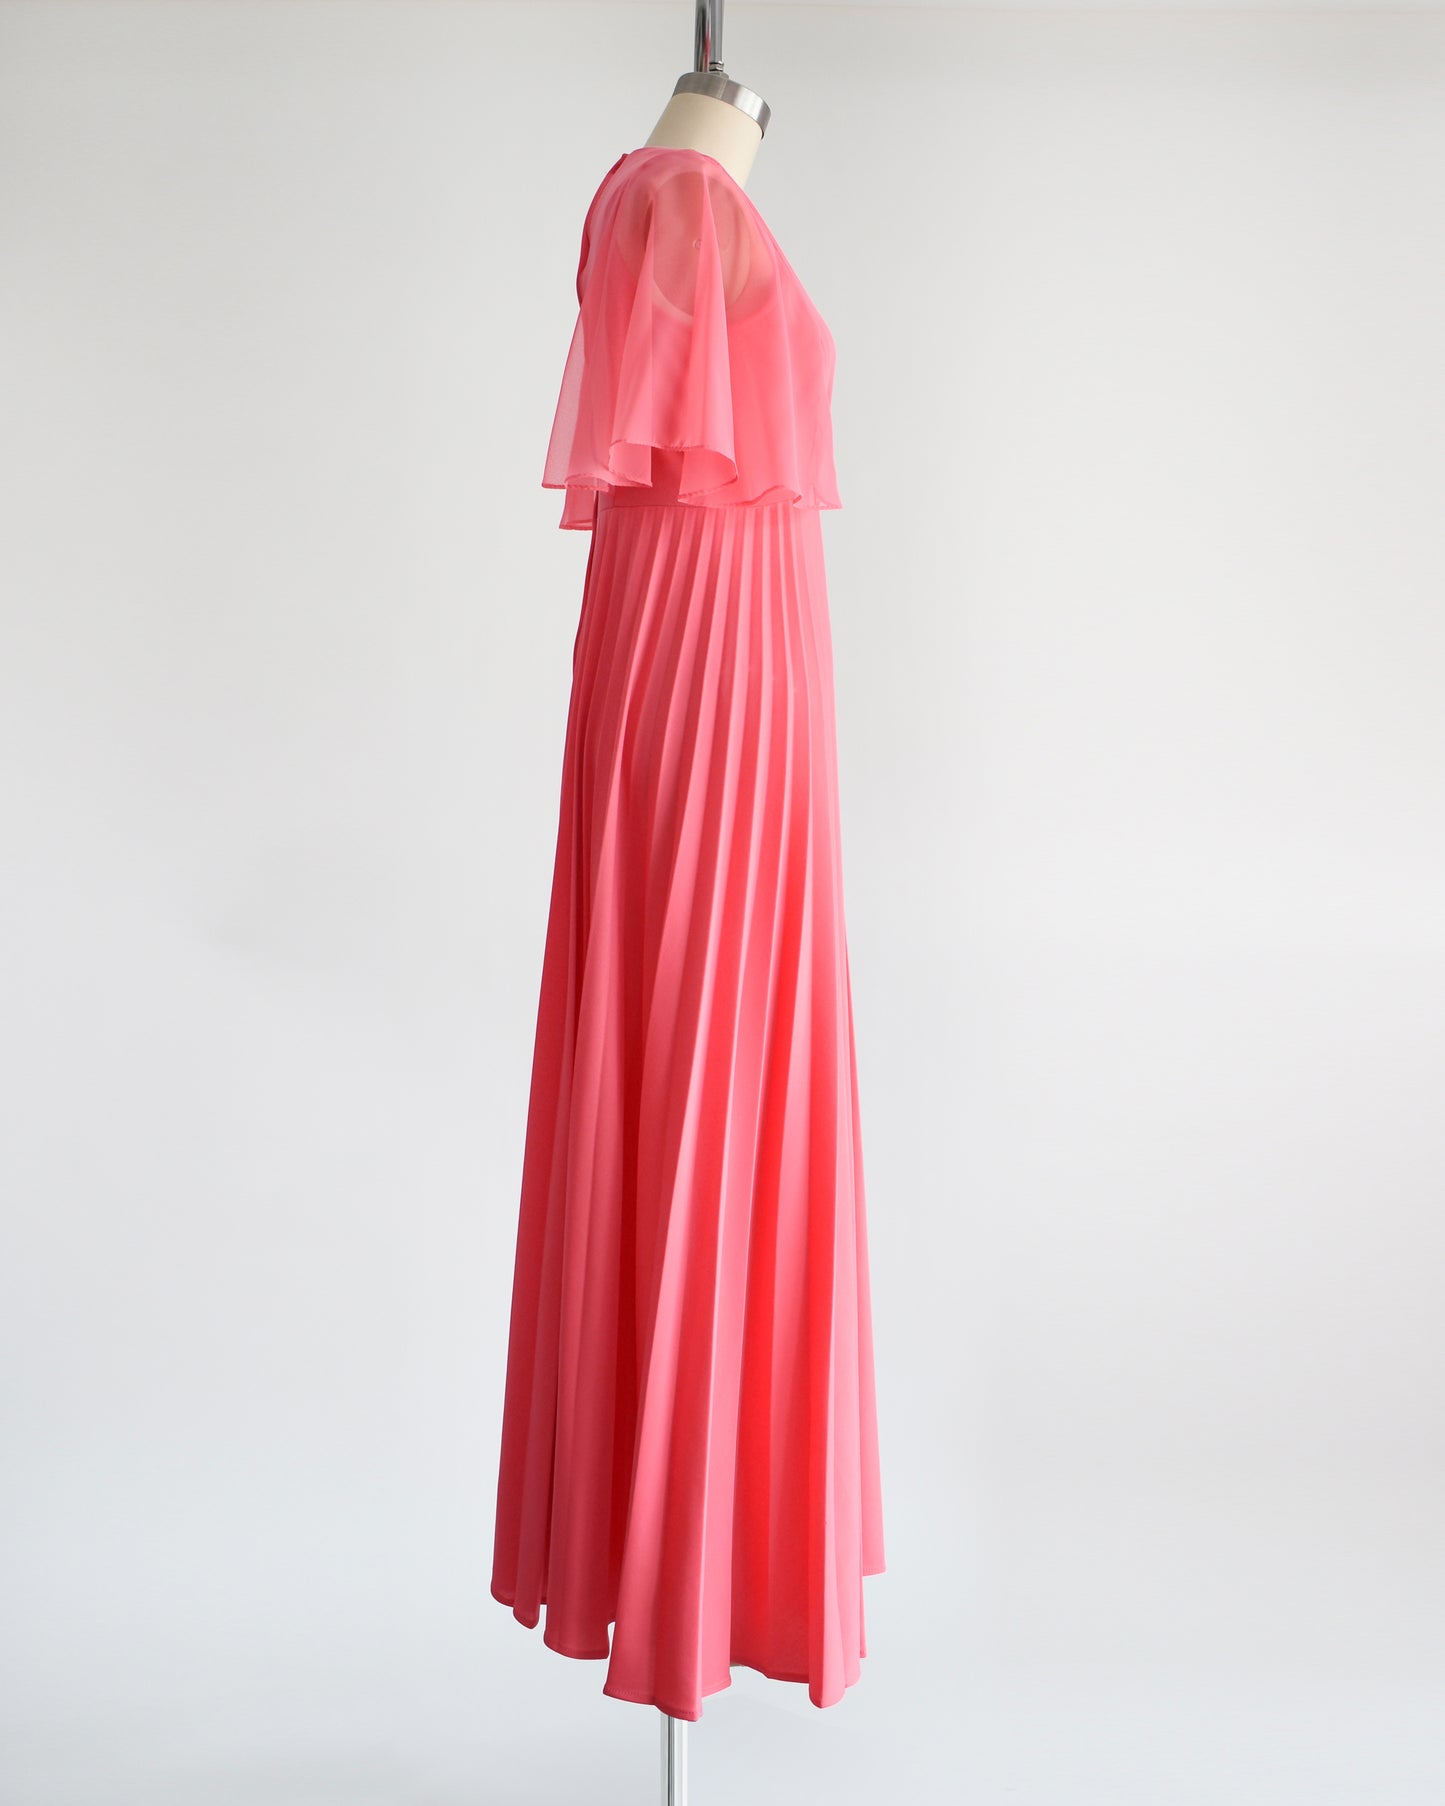 Side view of a vintage 70s coral pink maxi dress that has a faux wrap front with semi-sheer flutter sleeves, empire waist, and a long flowing accordion pleated skirt. The dress is on a dress form.